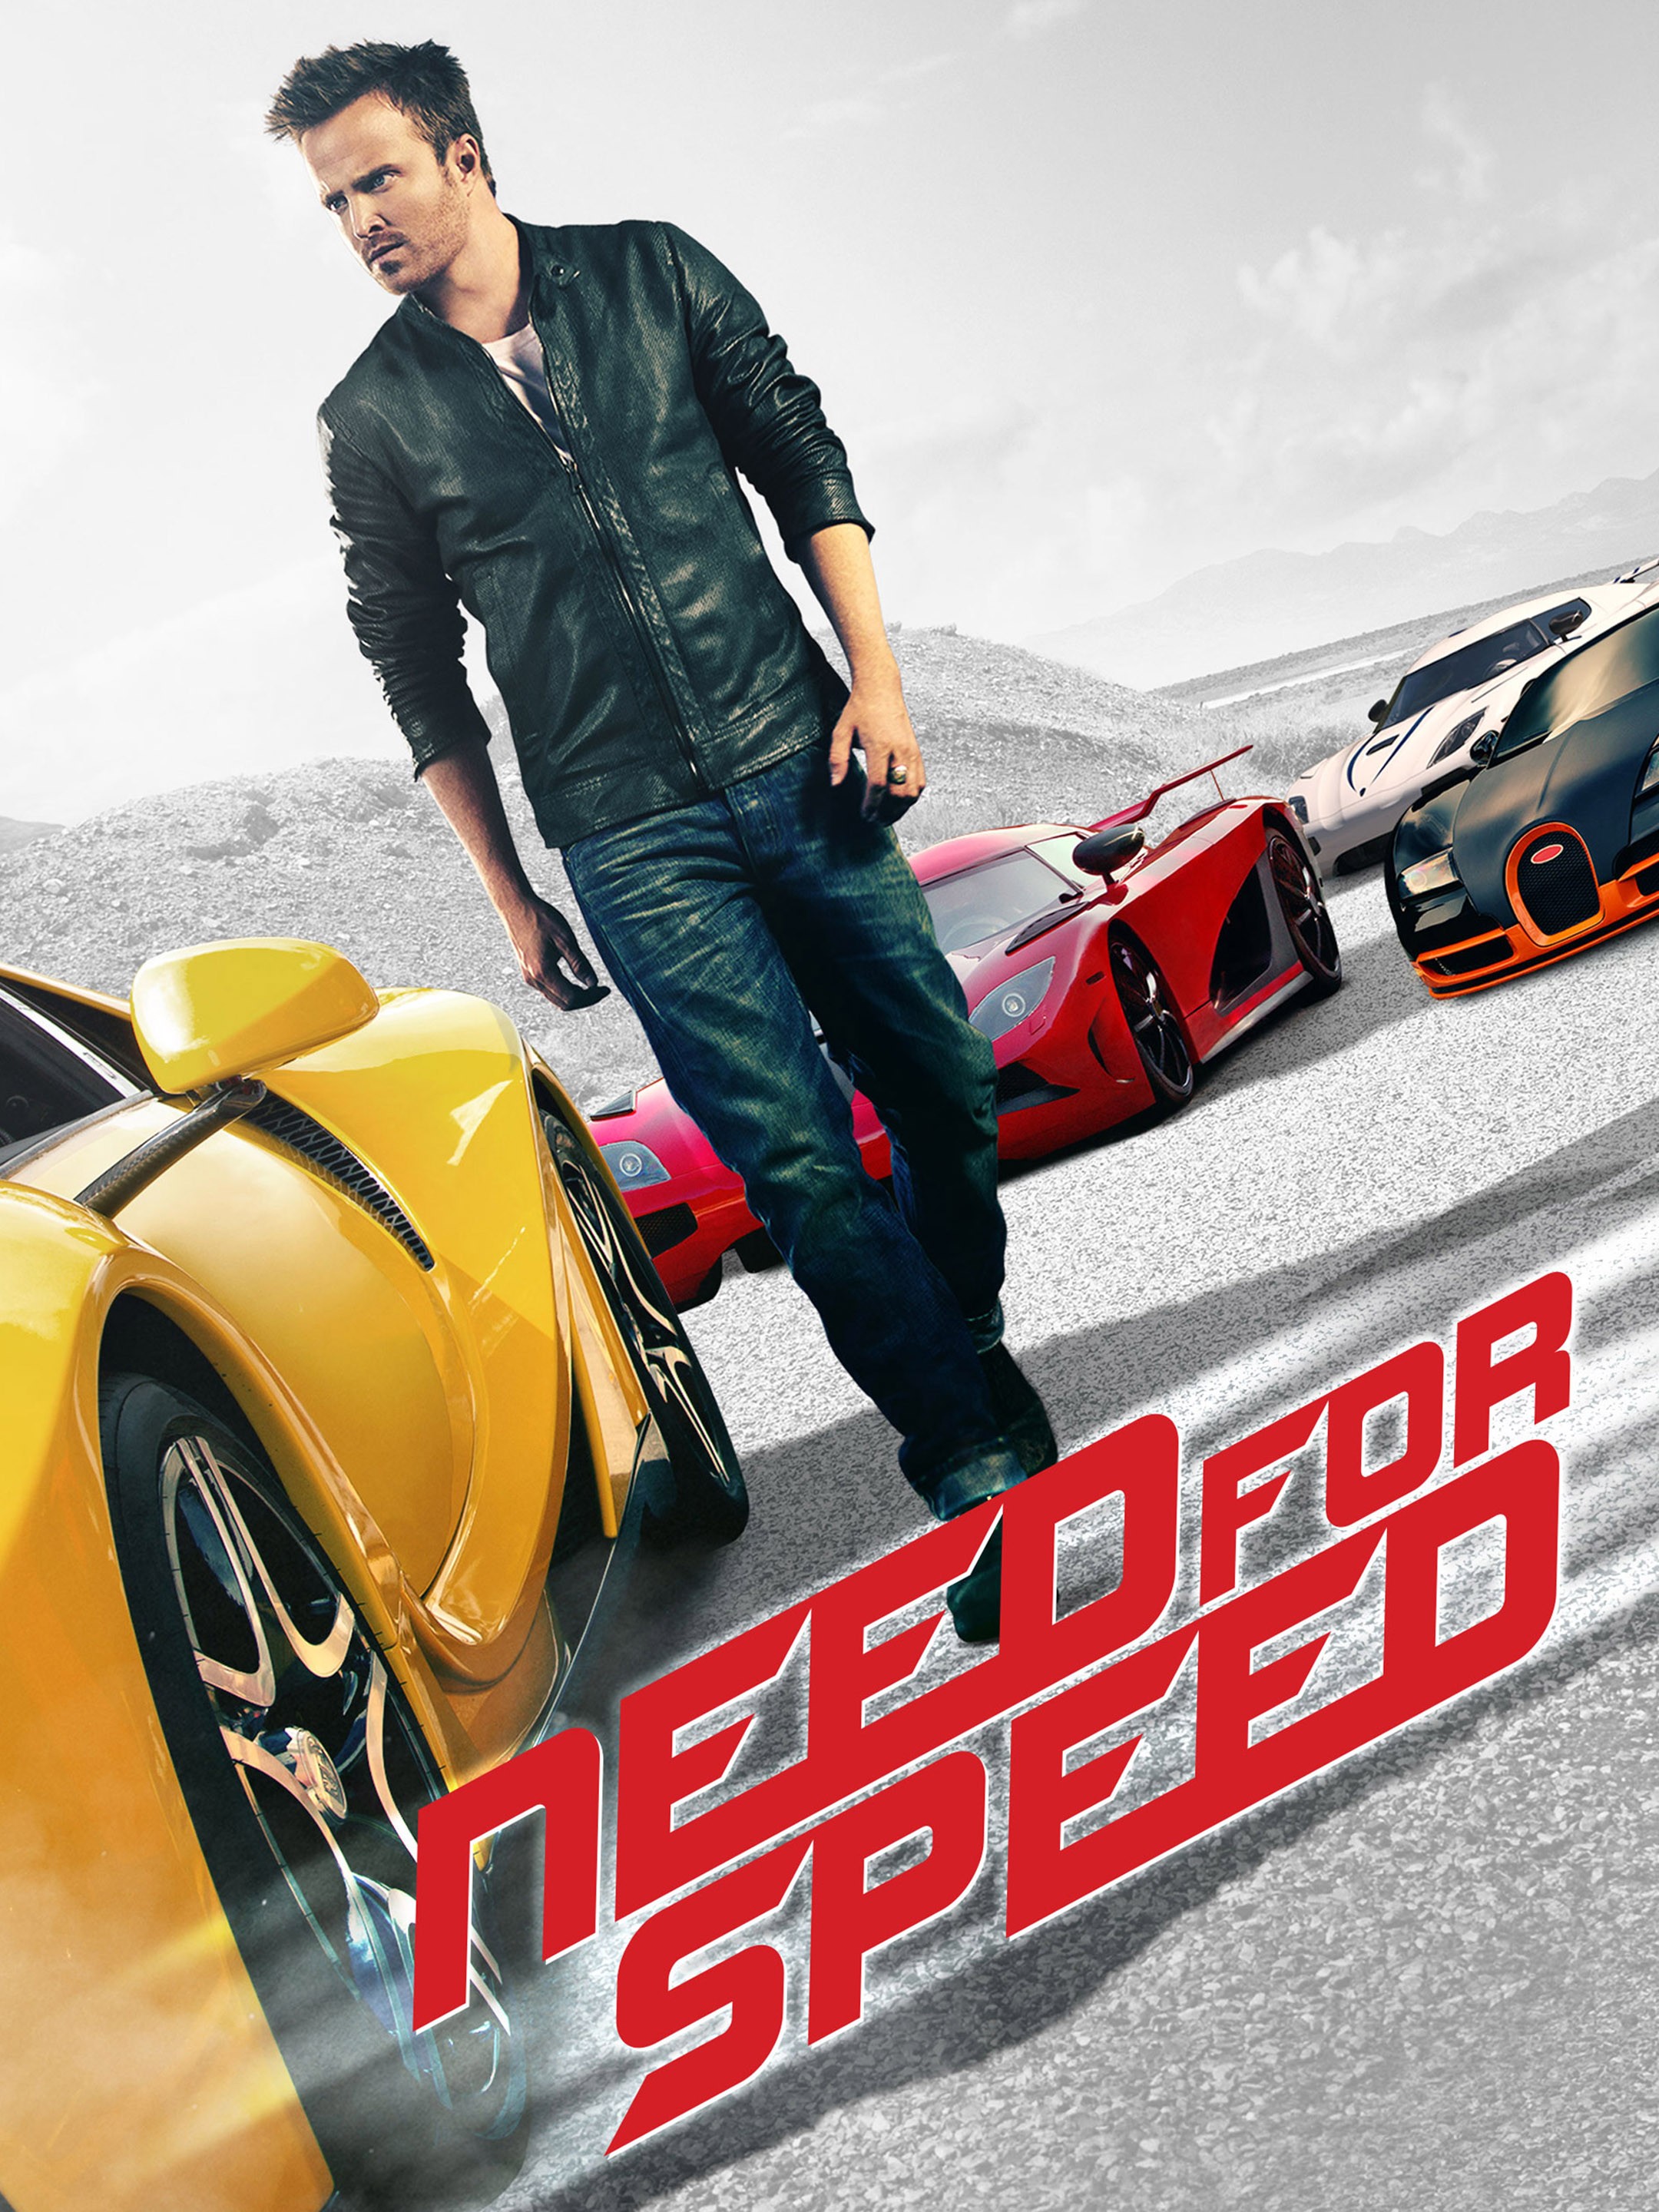 Need For Speed Movie Confirmed For 2014 Release